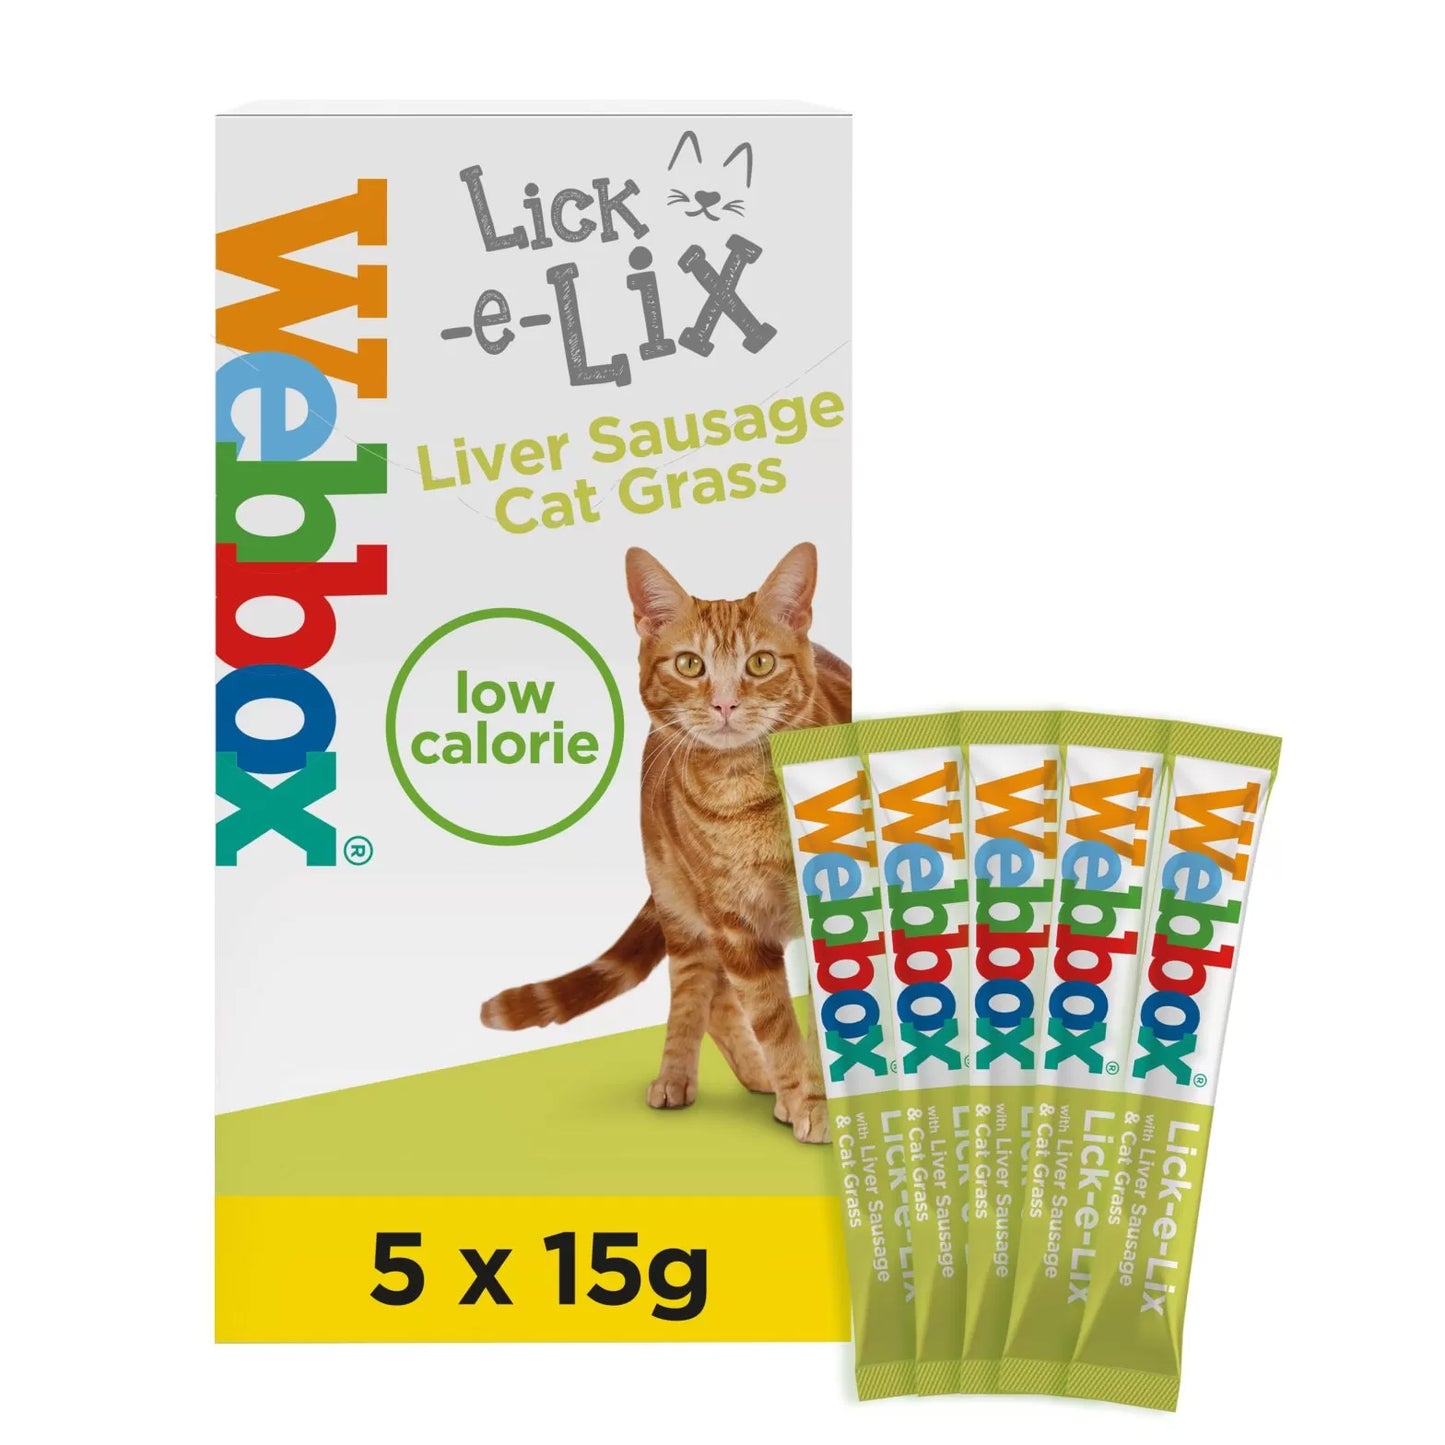 Webbox Lick E Lix With Liver Sausage & Cat Grass 15g - Pack of 5